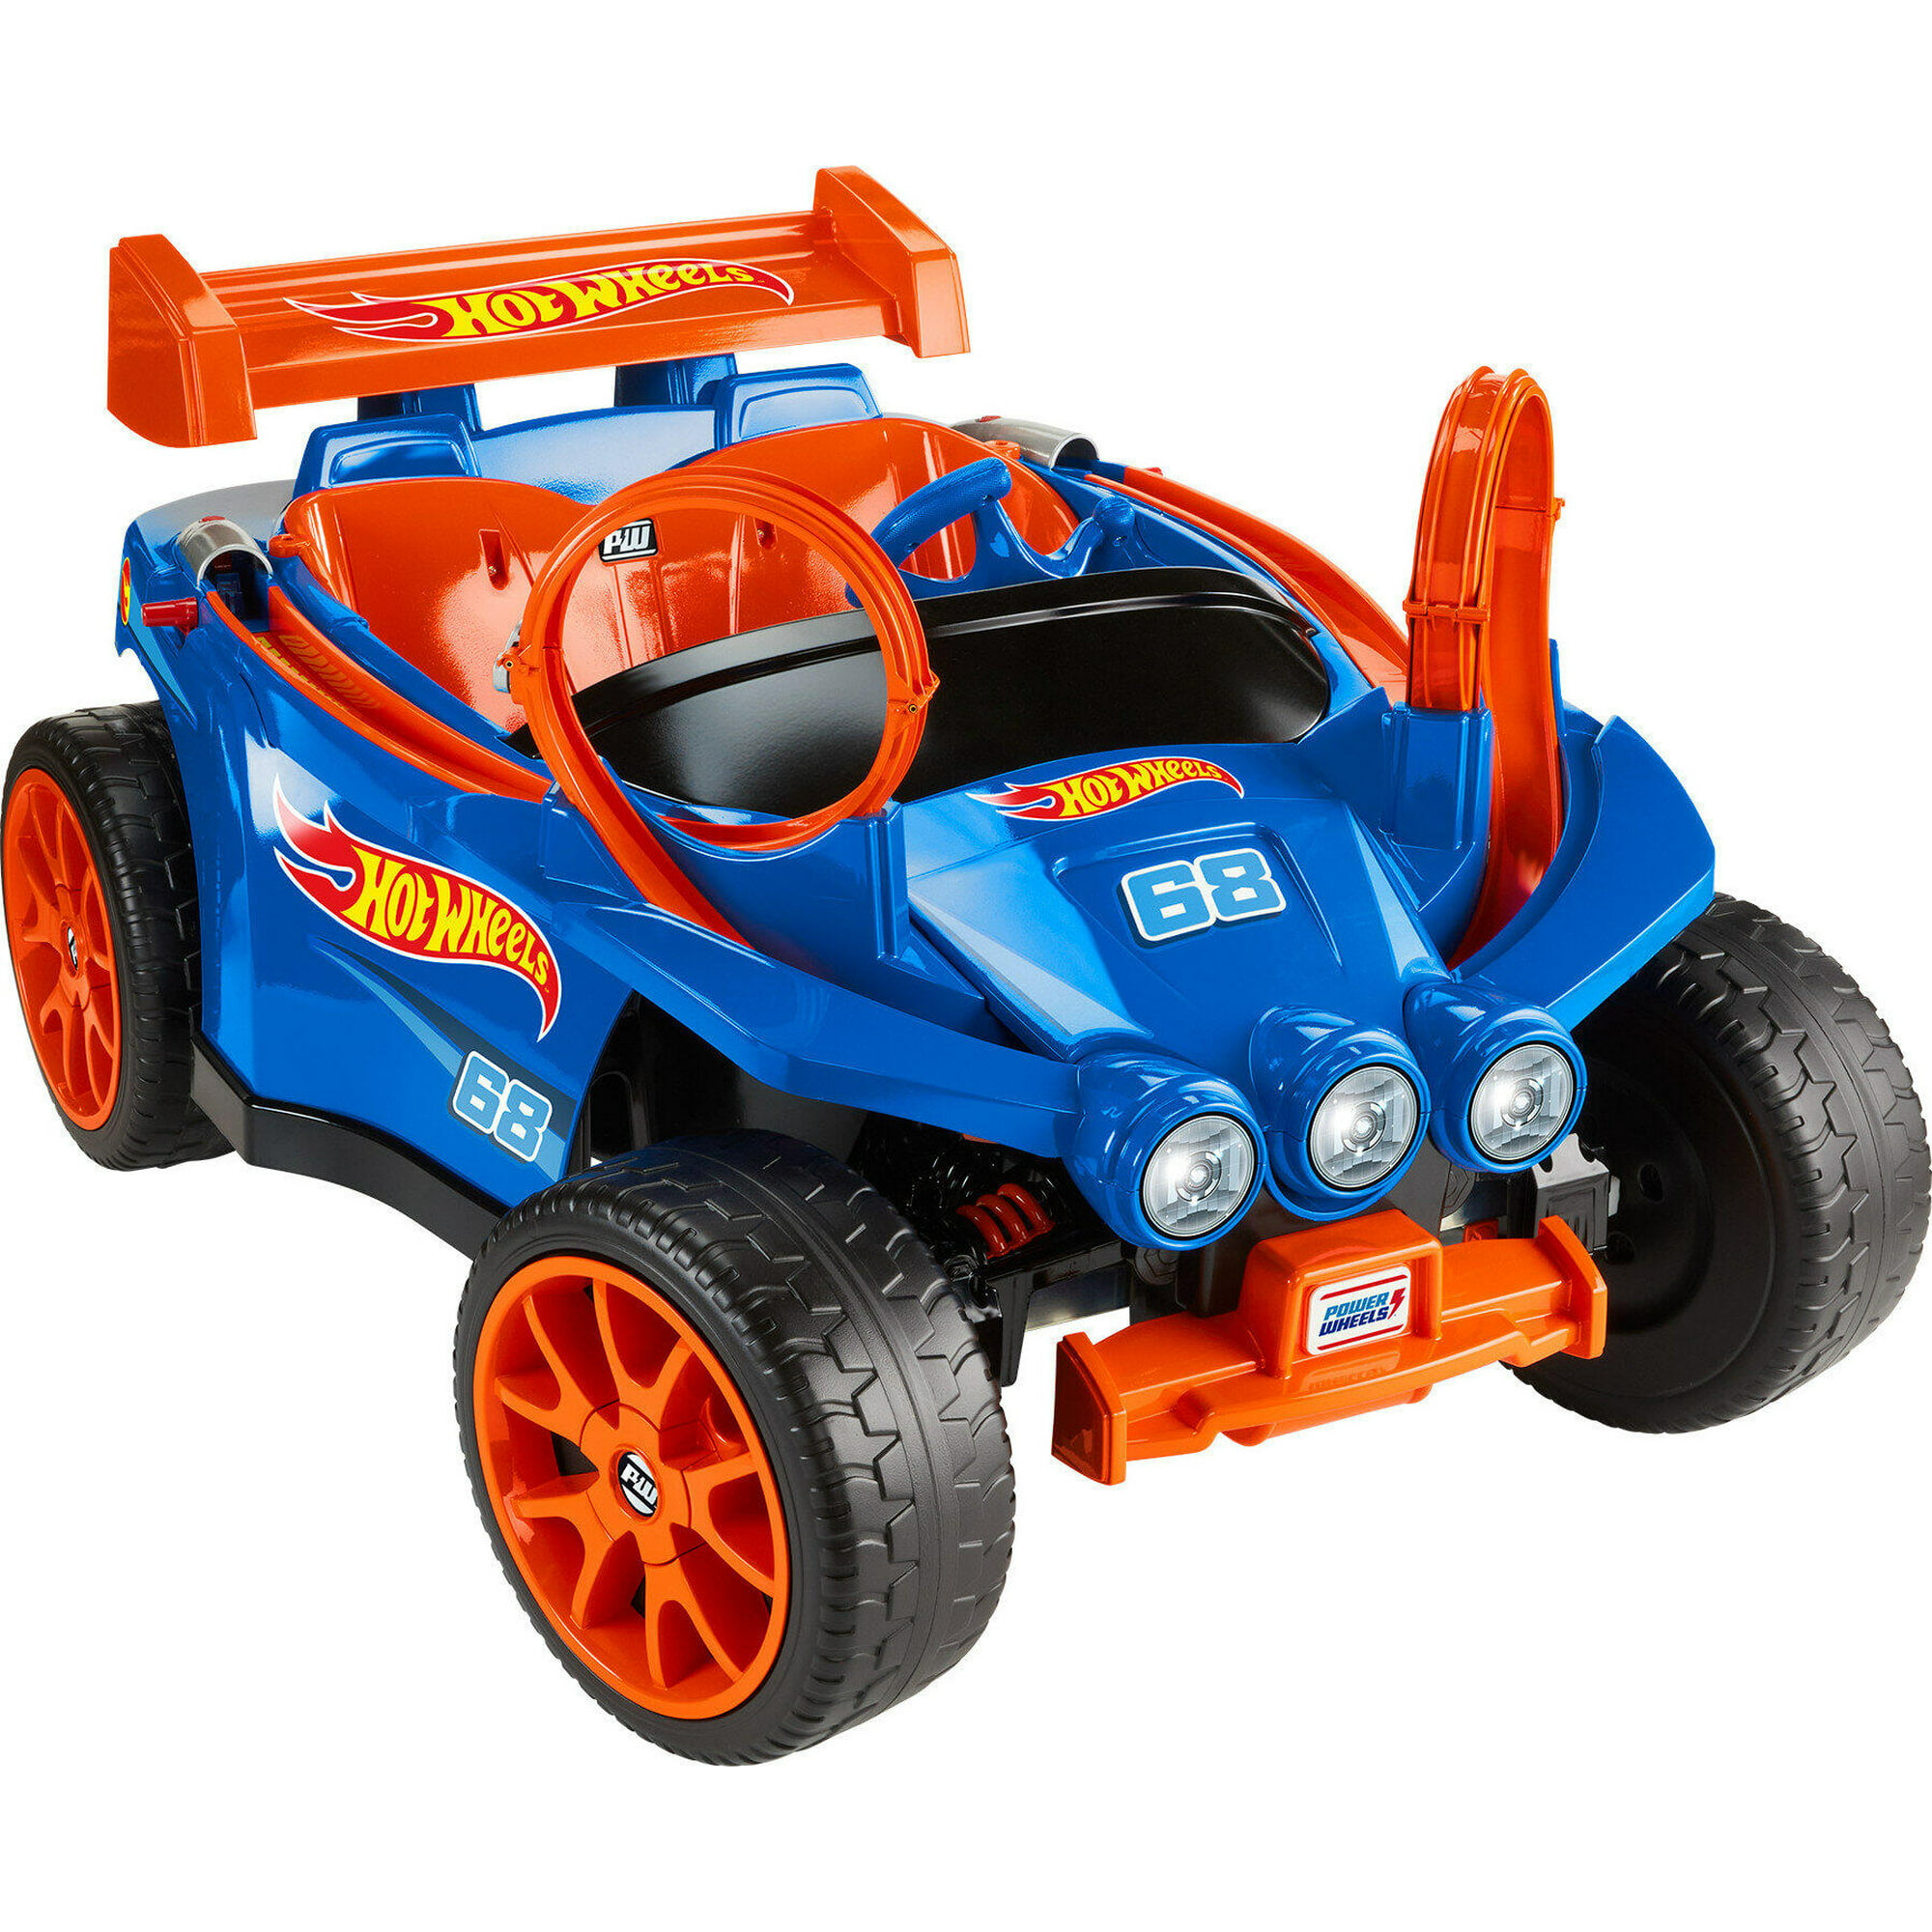 12V Power Wheels Hot Wheels Racer Battery Powered Ride On and Vehicle Playset with 5 Toy Cars f6482927 8983 4eb9 8c93 8764c09da14a.c082907e6015787beaf16a74af1d3fec